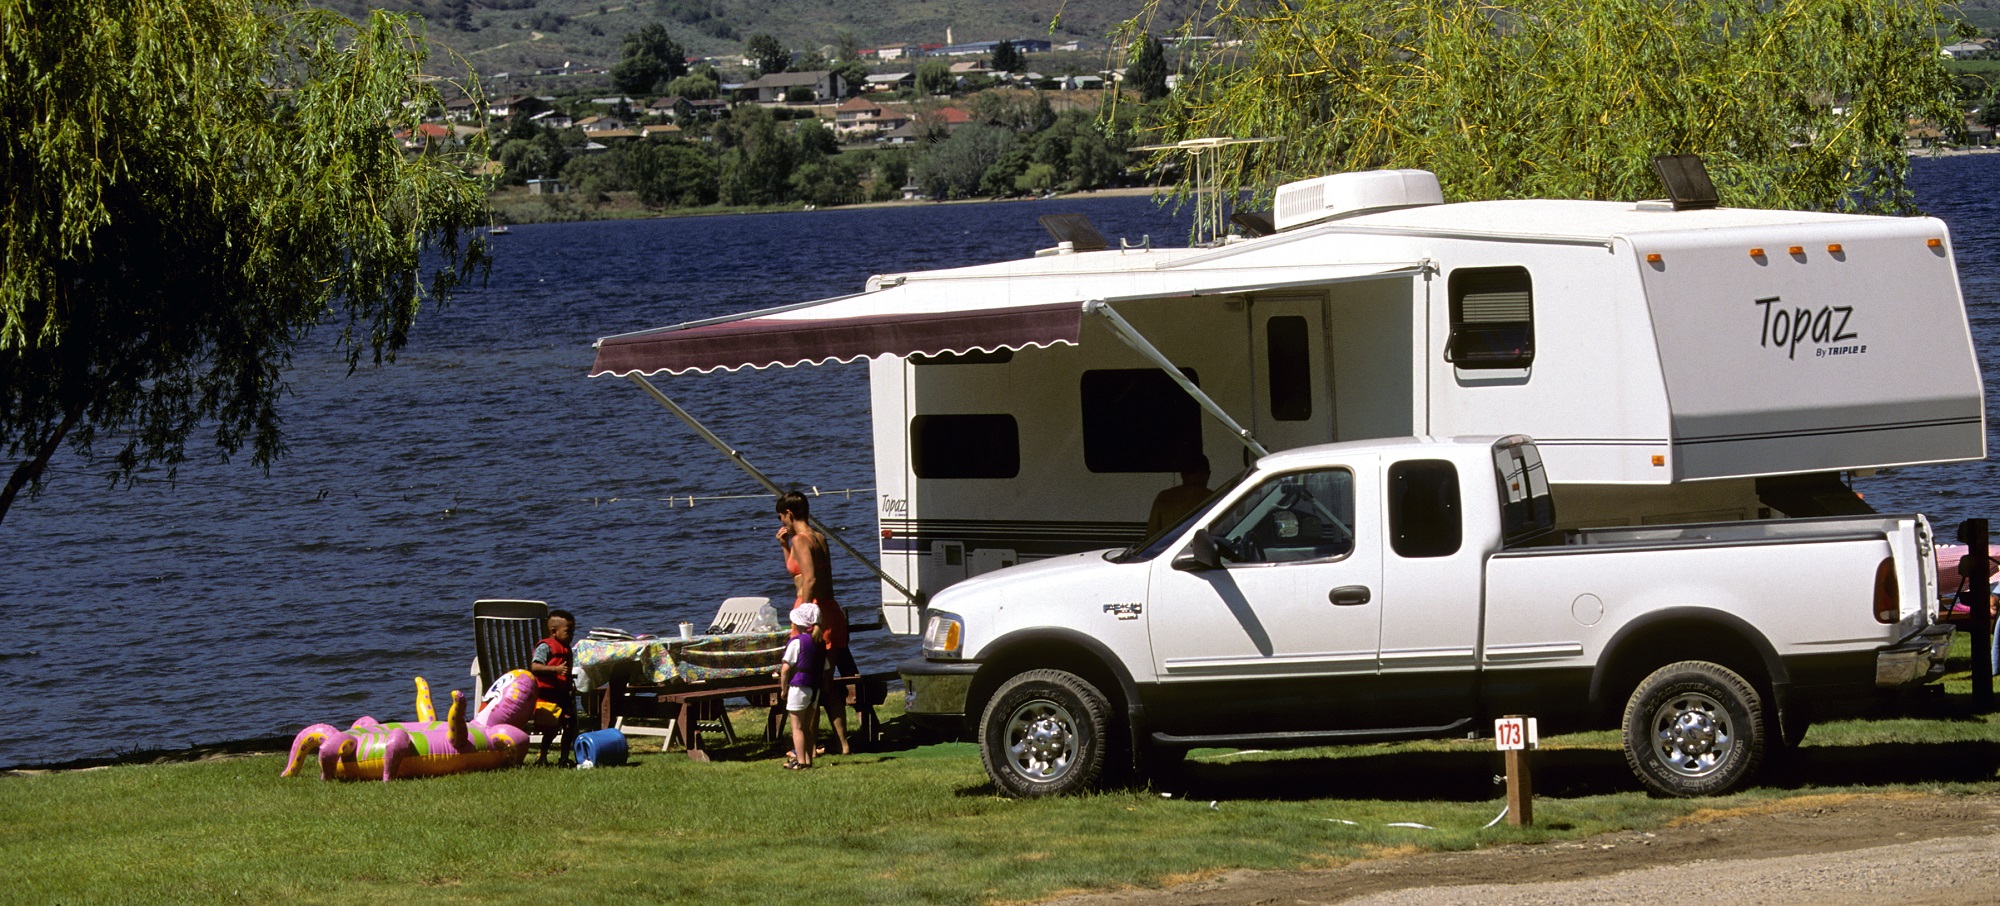 RV and Truck by the lake.